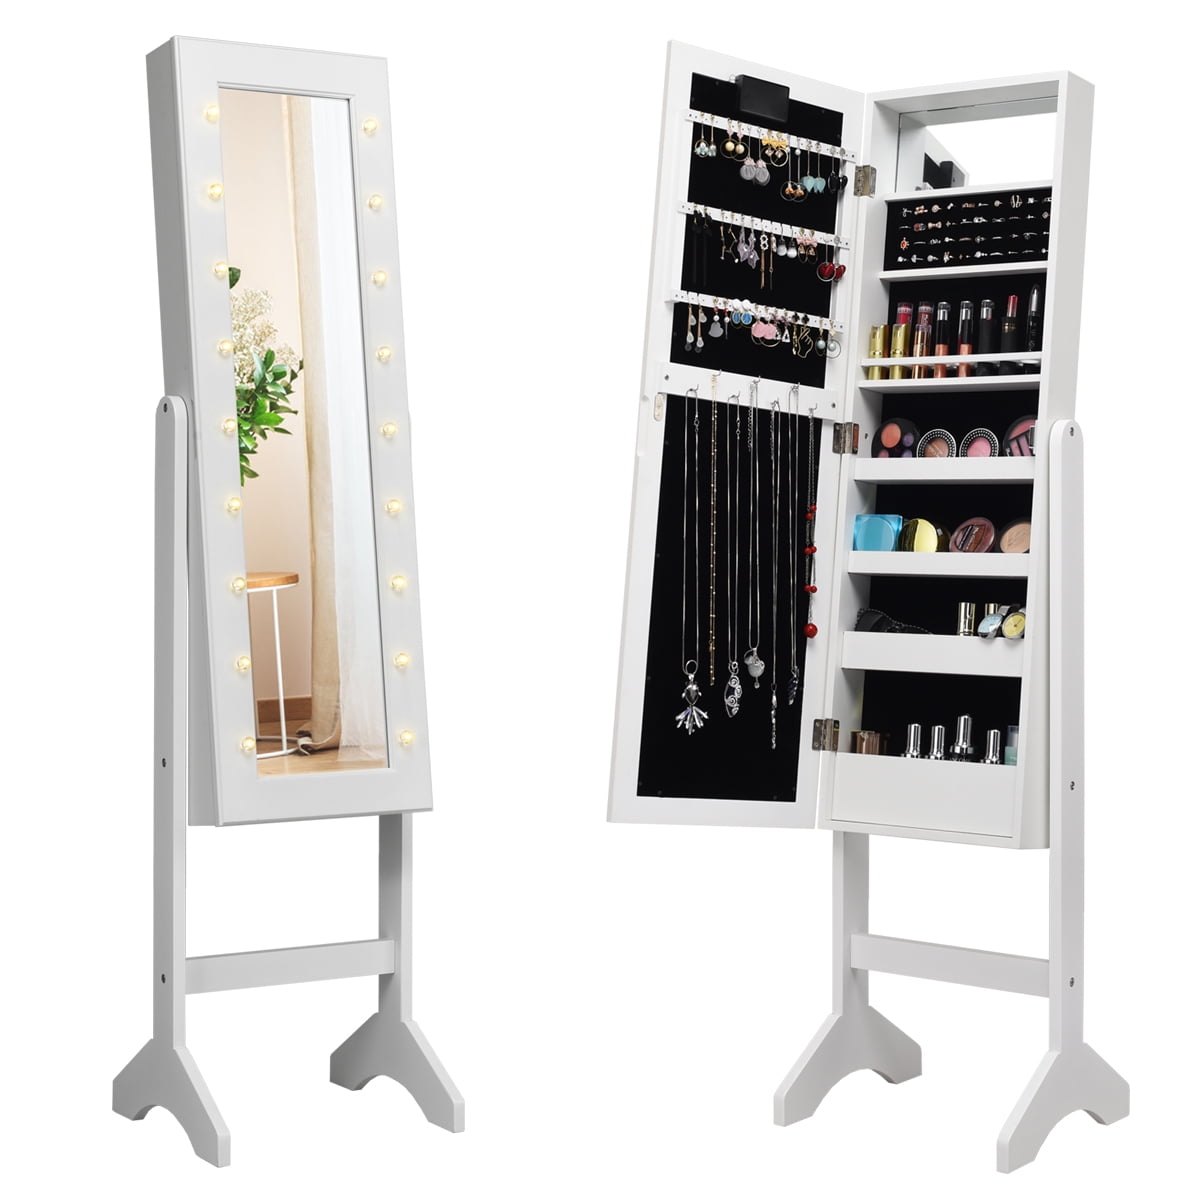 COSTWAY 18 LED Lights Jewelry Cabinet with Full Length Mirror 2-in-1 Floor Standing Adjustable Jewelry Armoire Black Home Bedroom Dressing Room Jewellery Storage Organiser Unit 